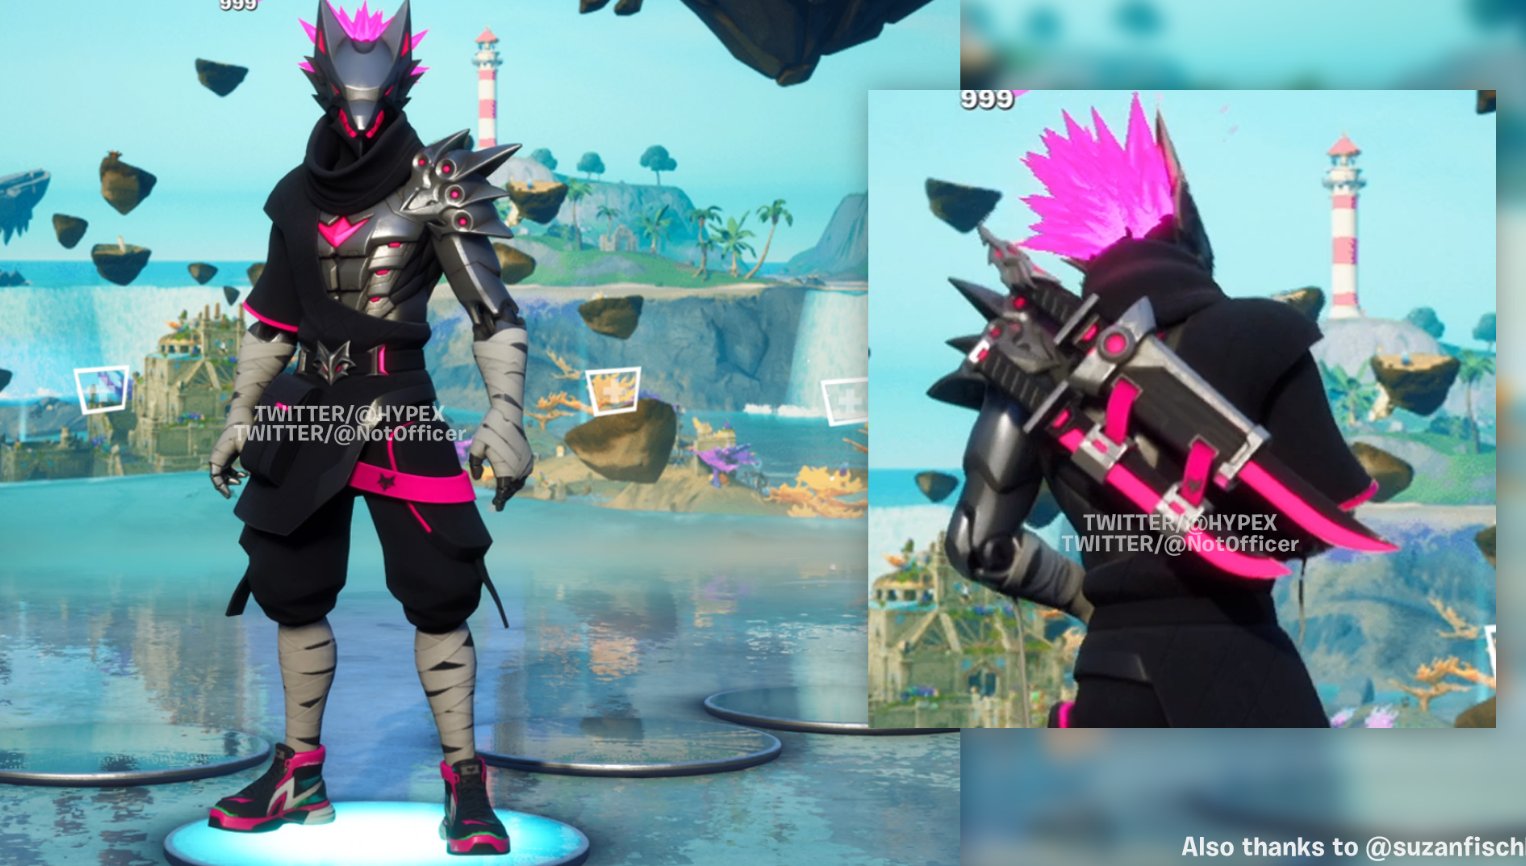 The Ninja Wolf skin with progressive styles is coming to Fortnite Crew 